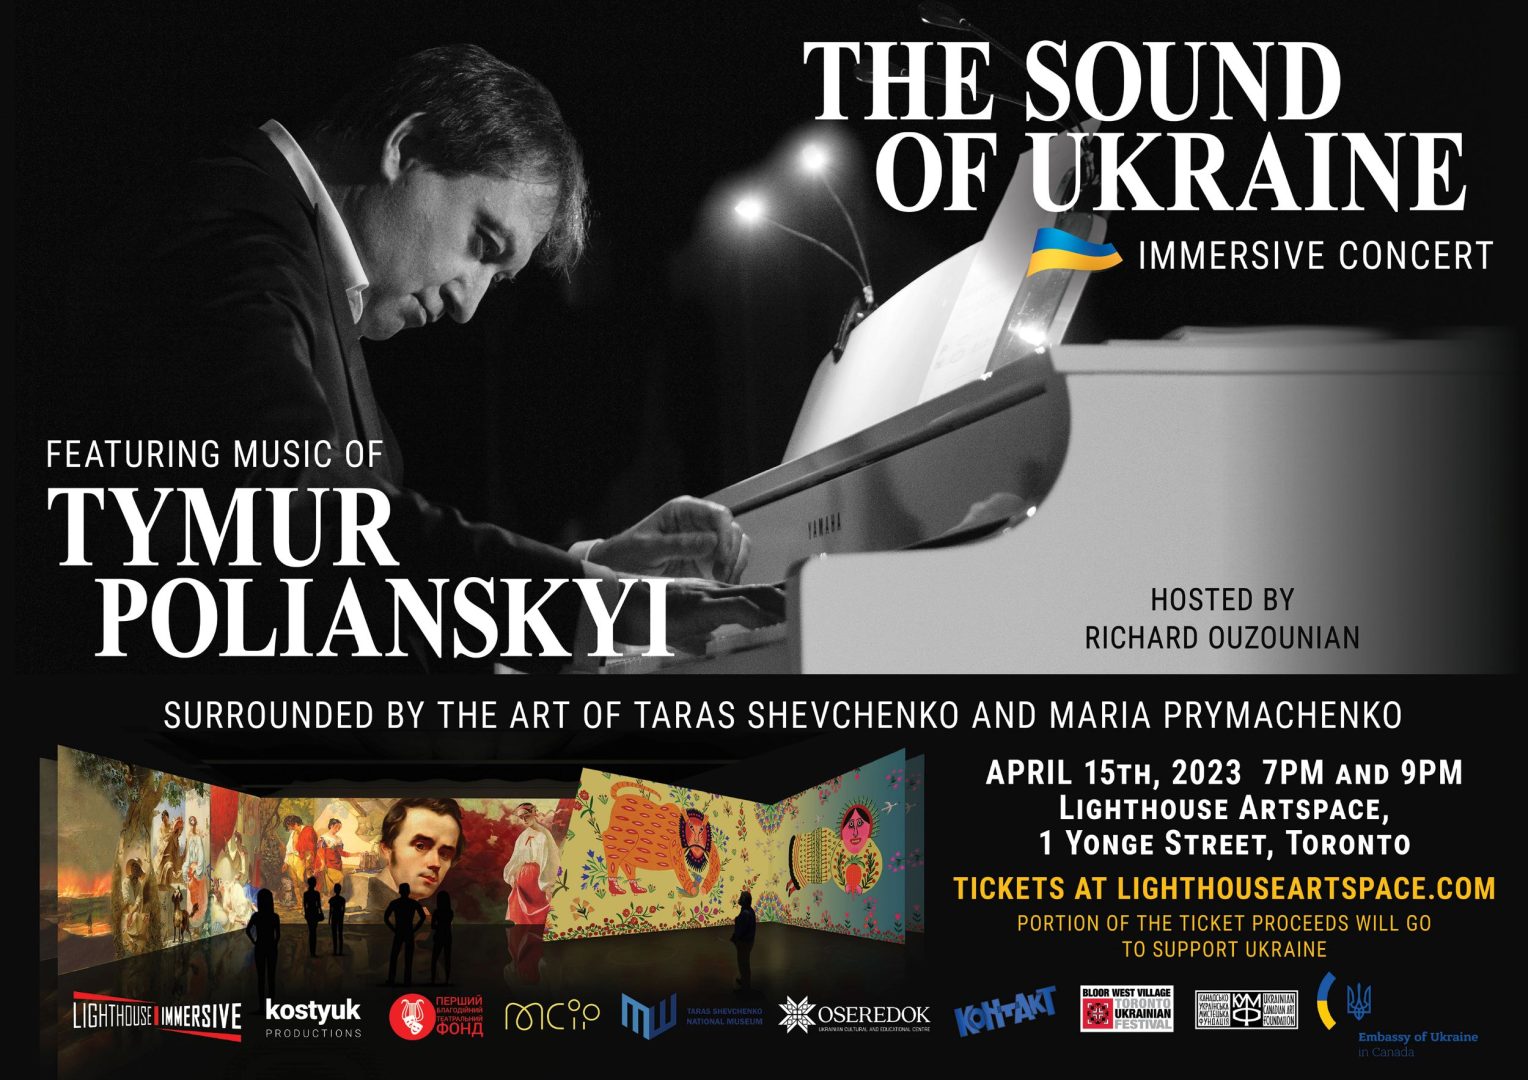 Gallery 1 - THE SOUND OF UKRAINE – An Immersive Concert